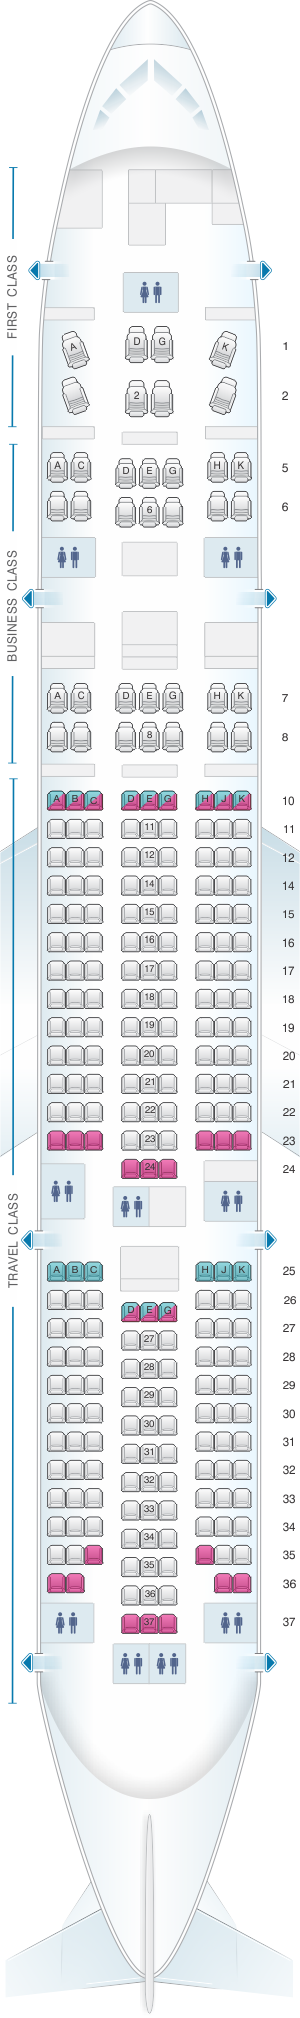 Seat map for Asiana Airlines Boeing B777 200ER 262PAX